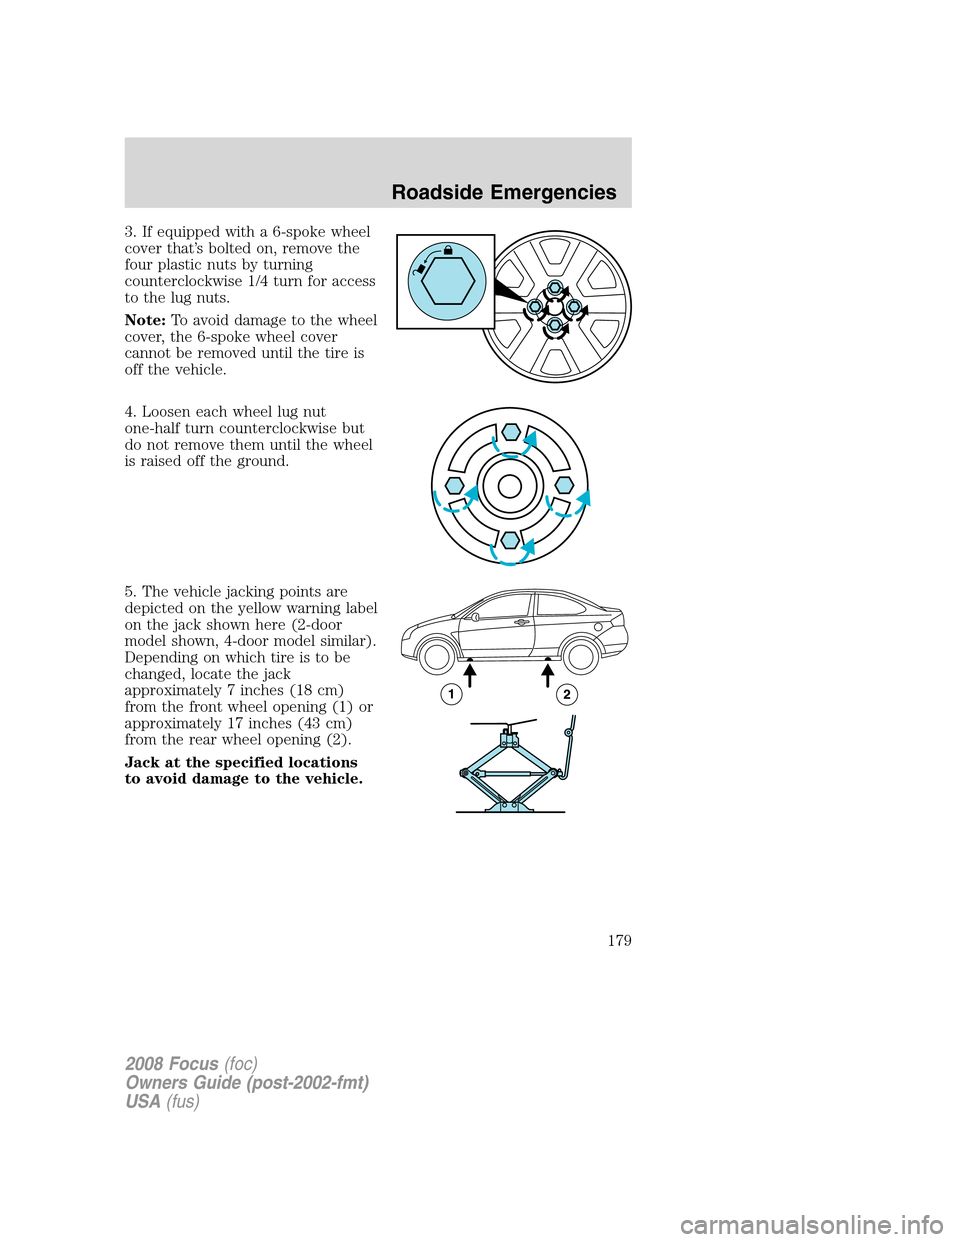 FORD FOCUS 2008 2.G Owners Manual 3. If equipped with a 6-spoke wheel
cover that’s bolted on, remove the
four plastic nuts by turning
counterclockwise 1/4 turn for access
to the lug nuts.
Note:To avoid damage to the wheel
cover, the